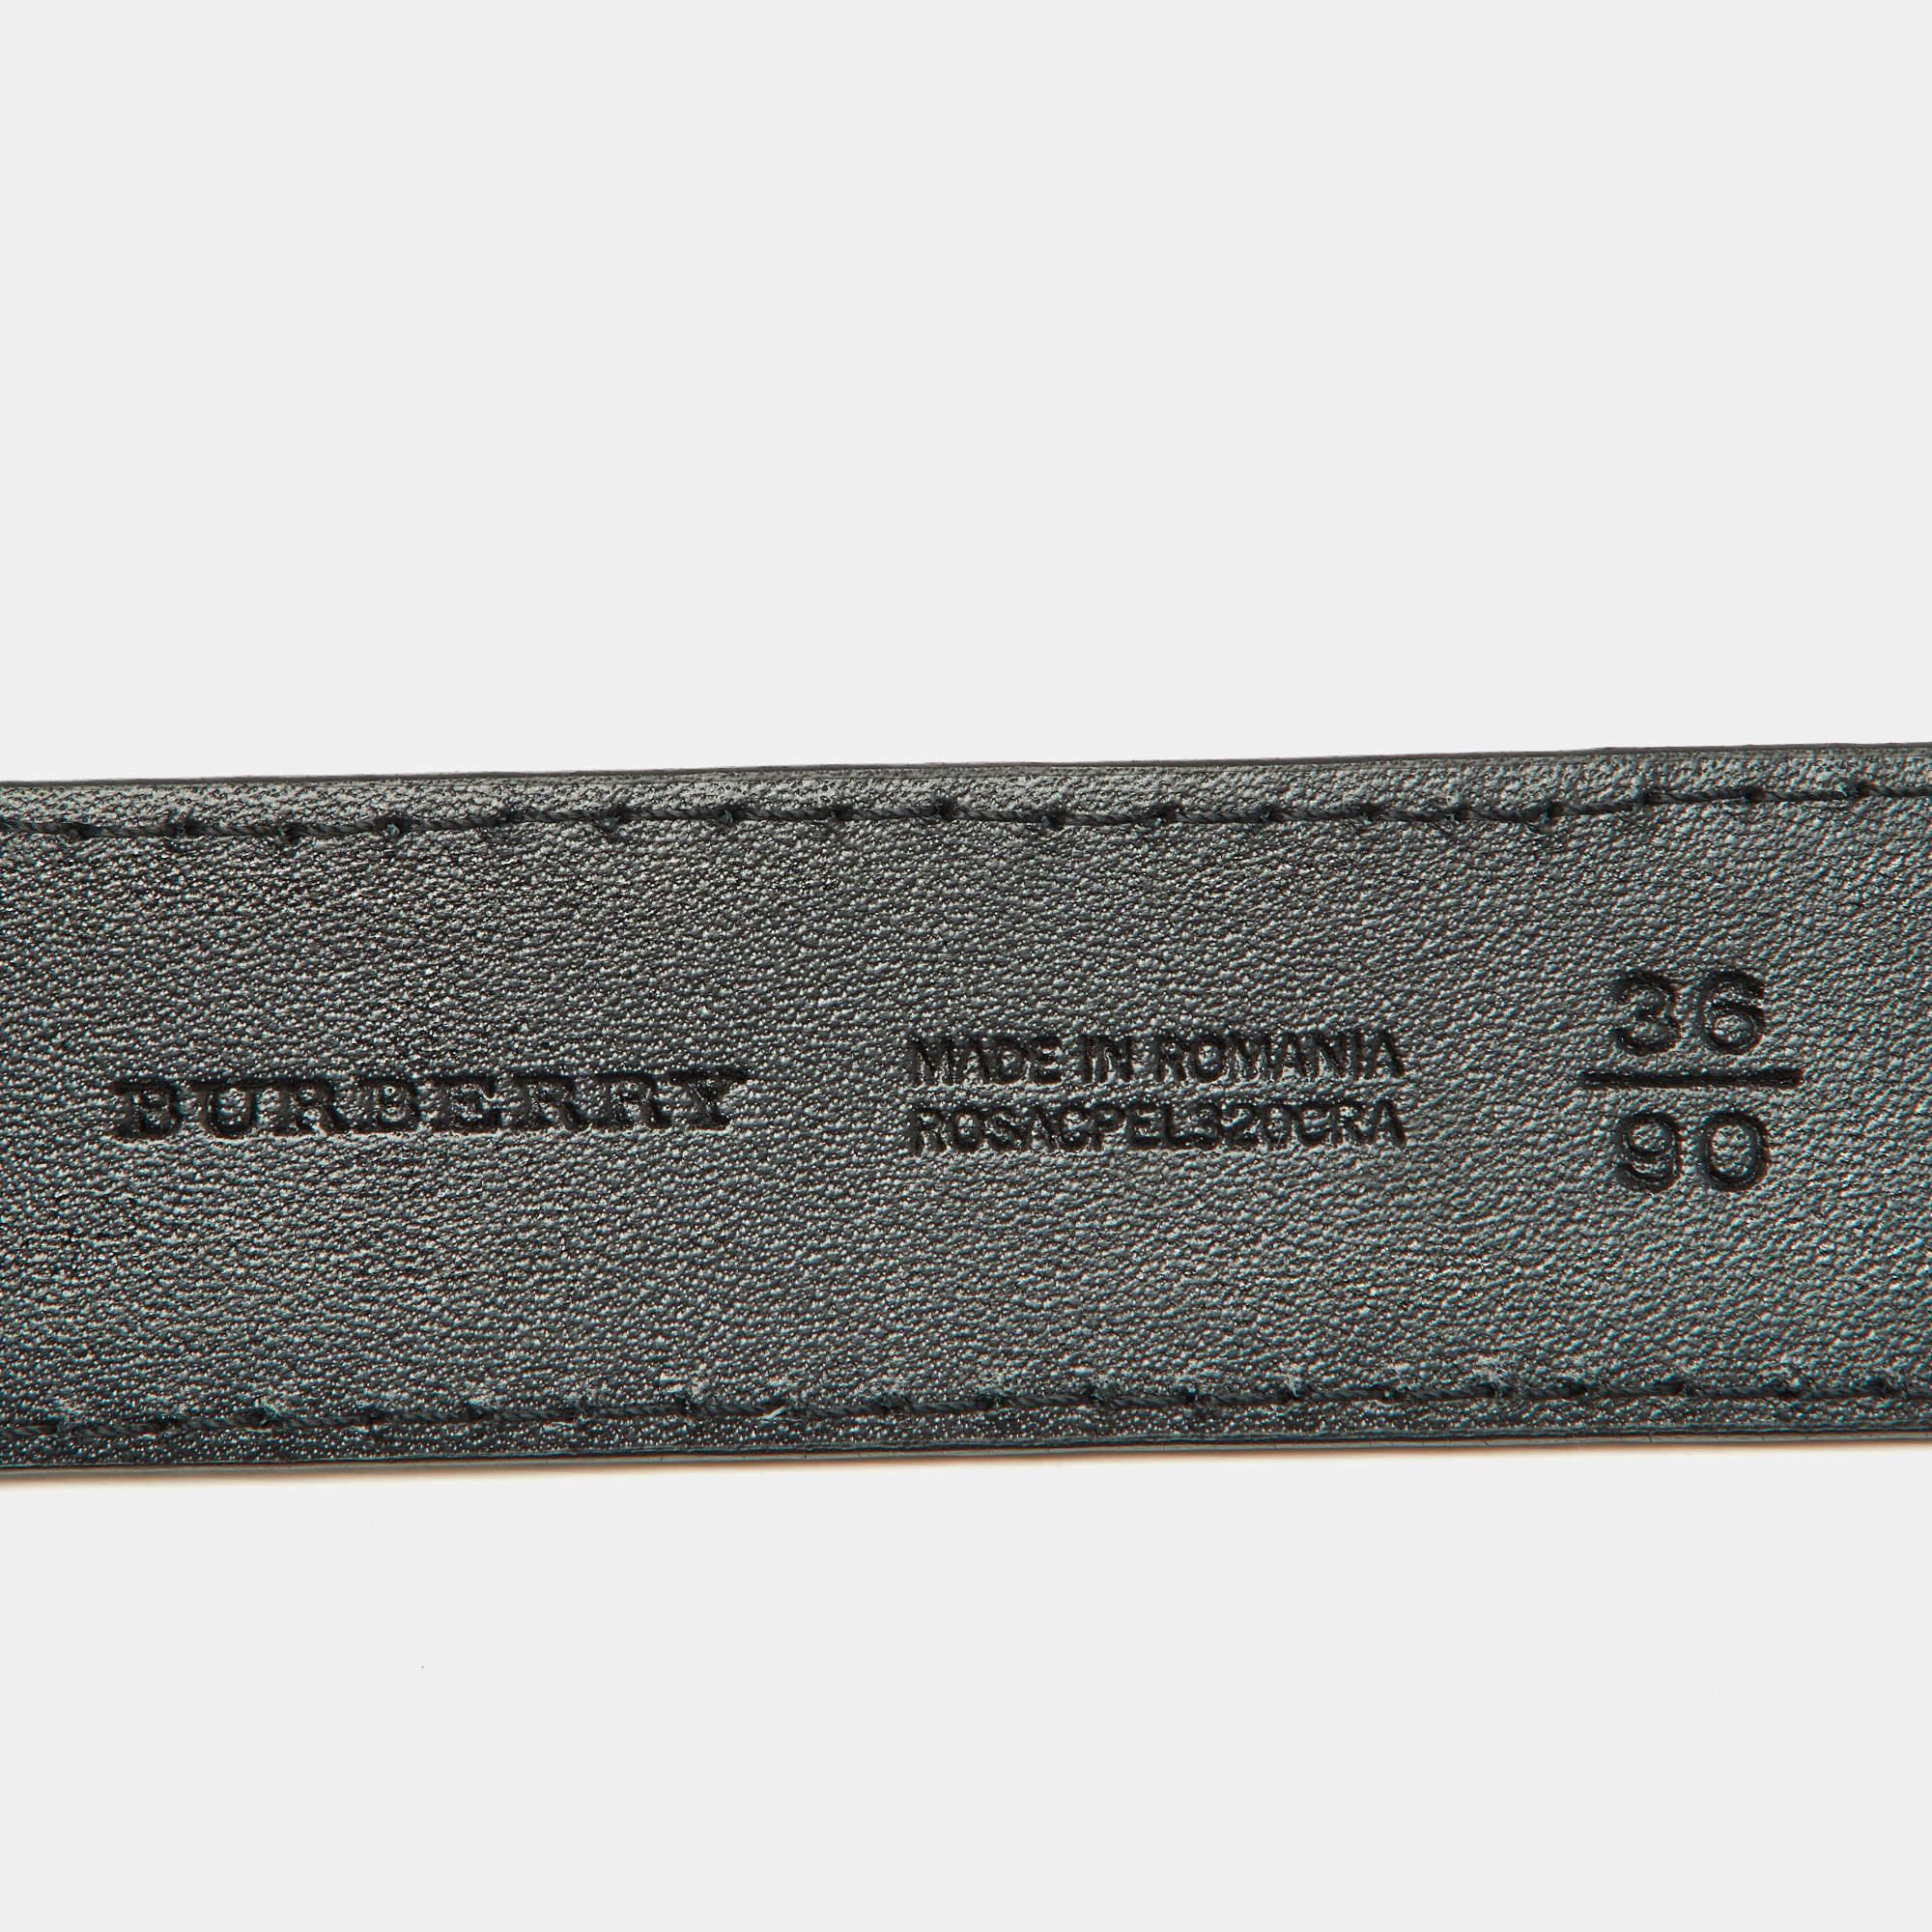 Belts are a staple accessory every closet needs to have. This one from Burberry will make a great buy as it is well-crafted and designed to assist your style. It is made from leather and detailed with a pin buckle.

Includes: Original Box, Info